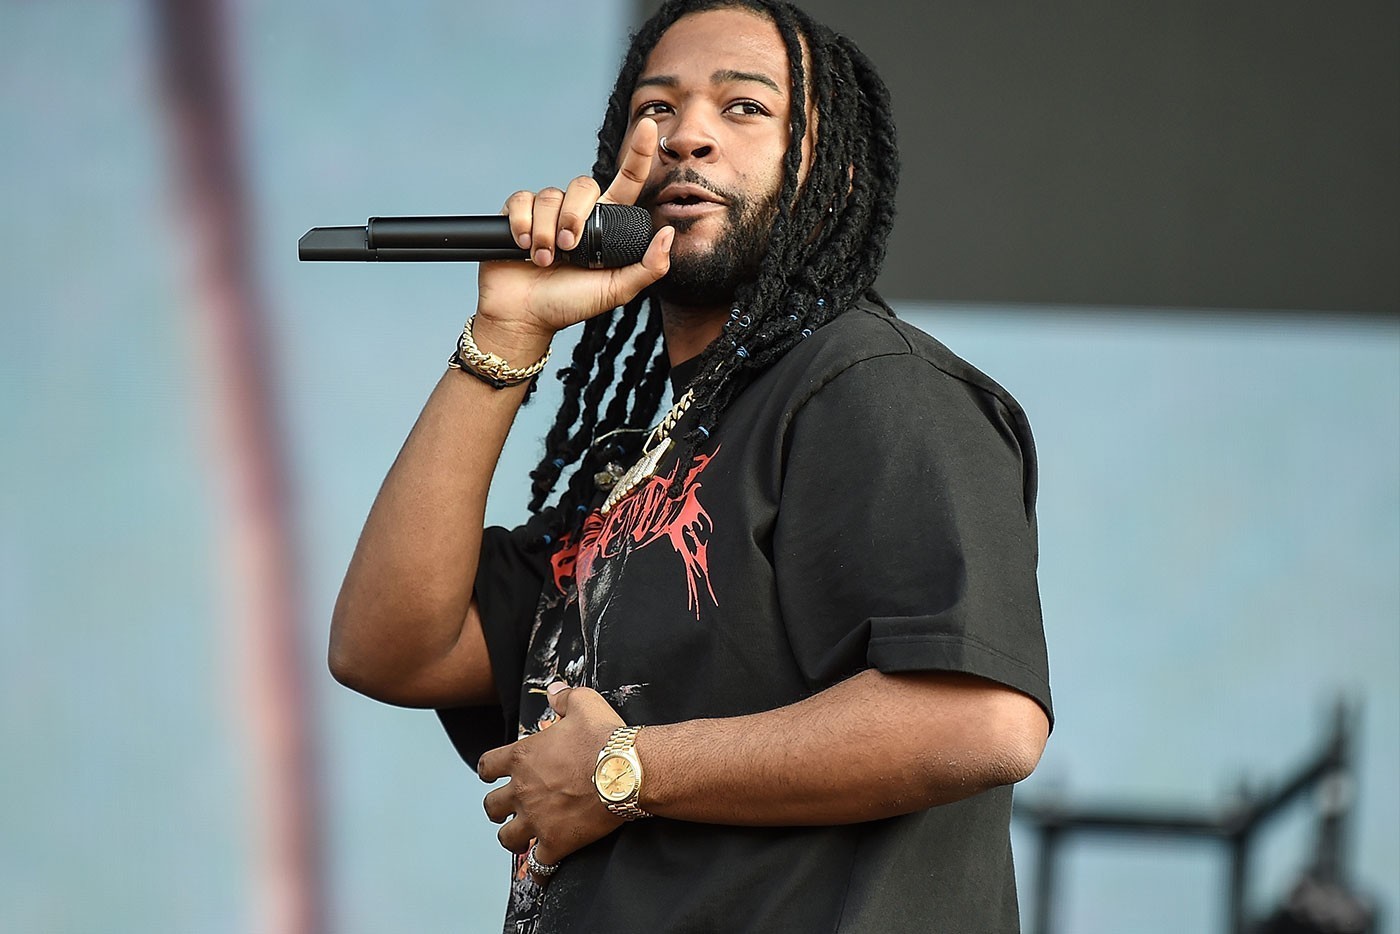 Listen to PARTYNEXTDOOR's New Song "Another Day"